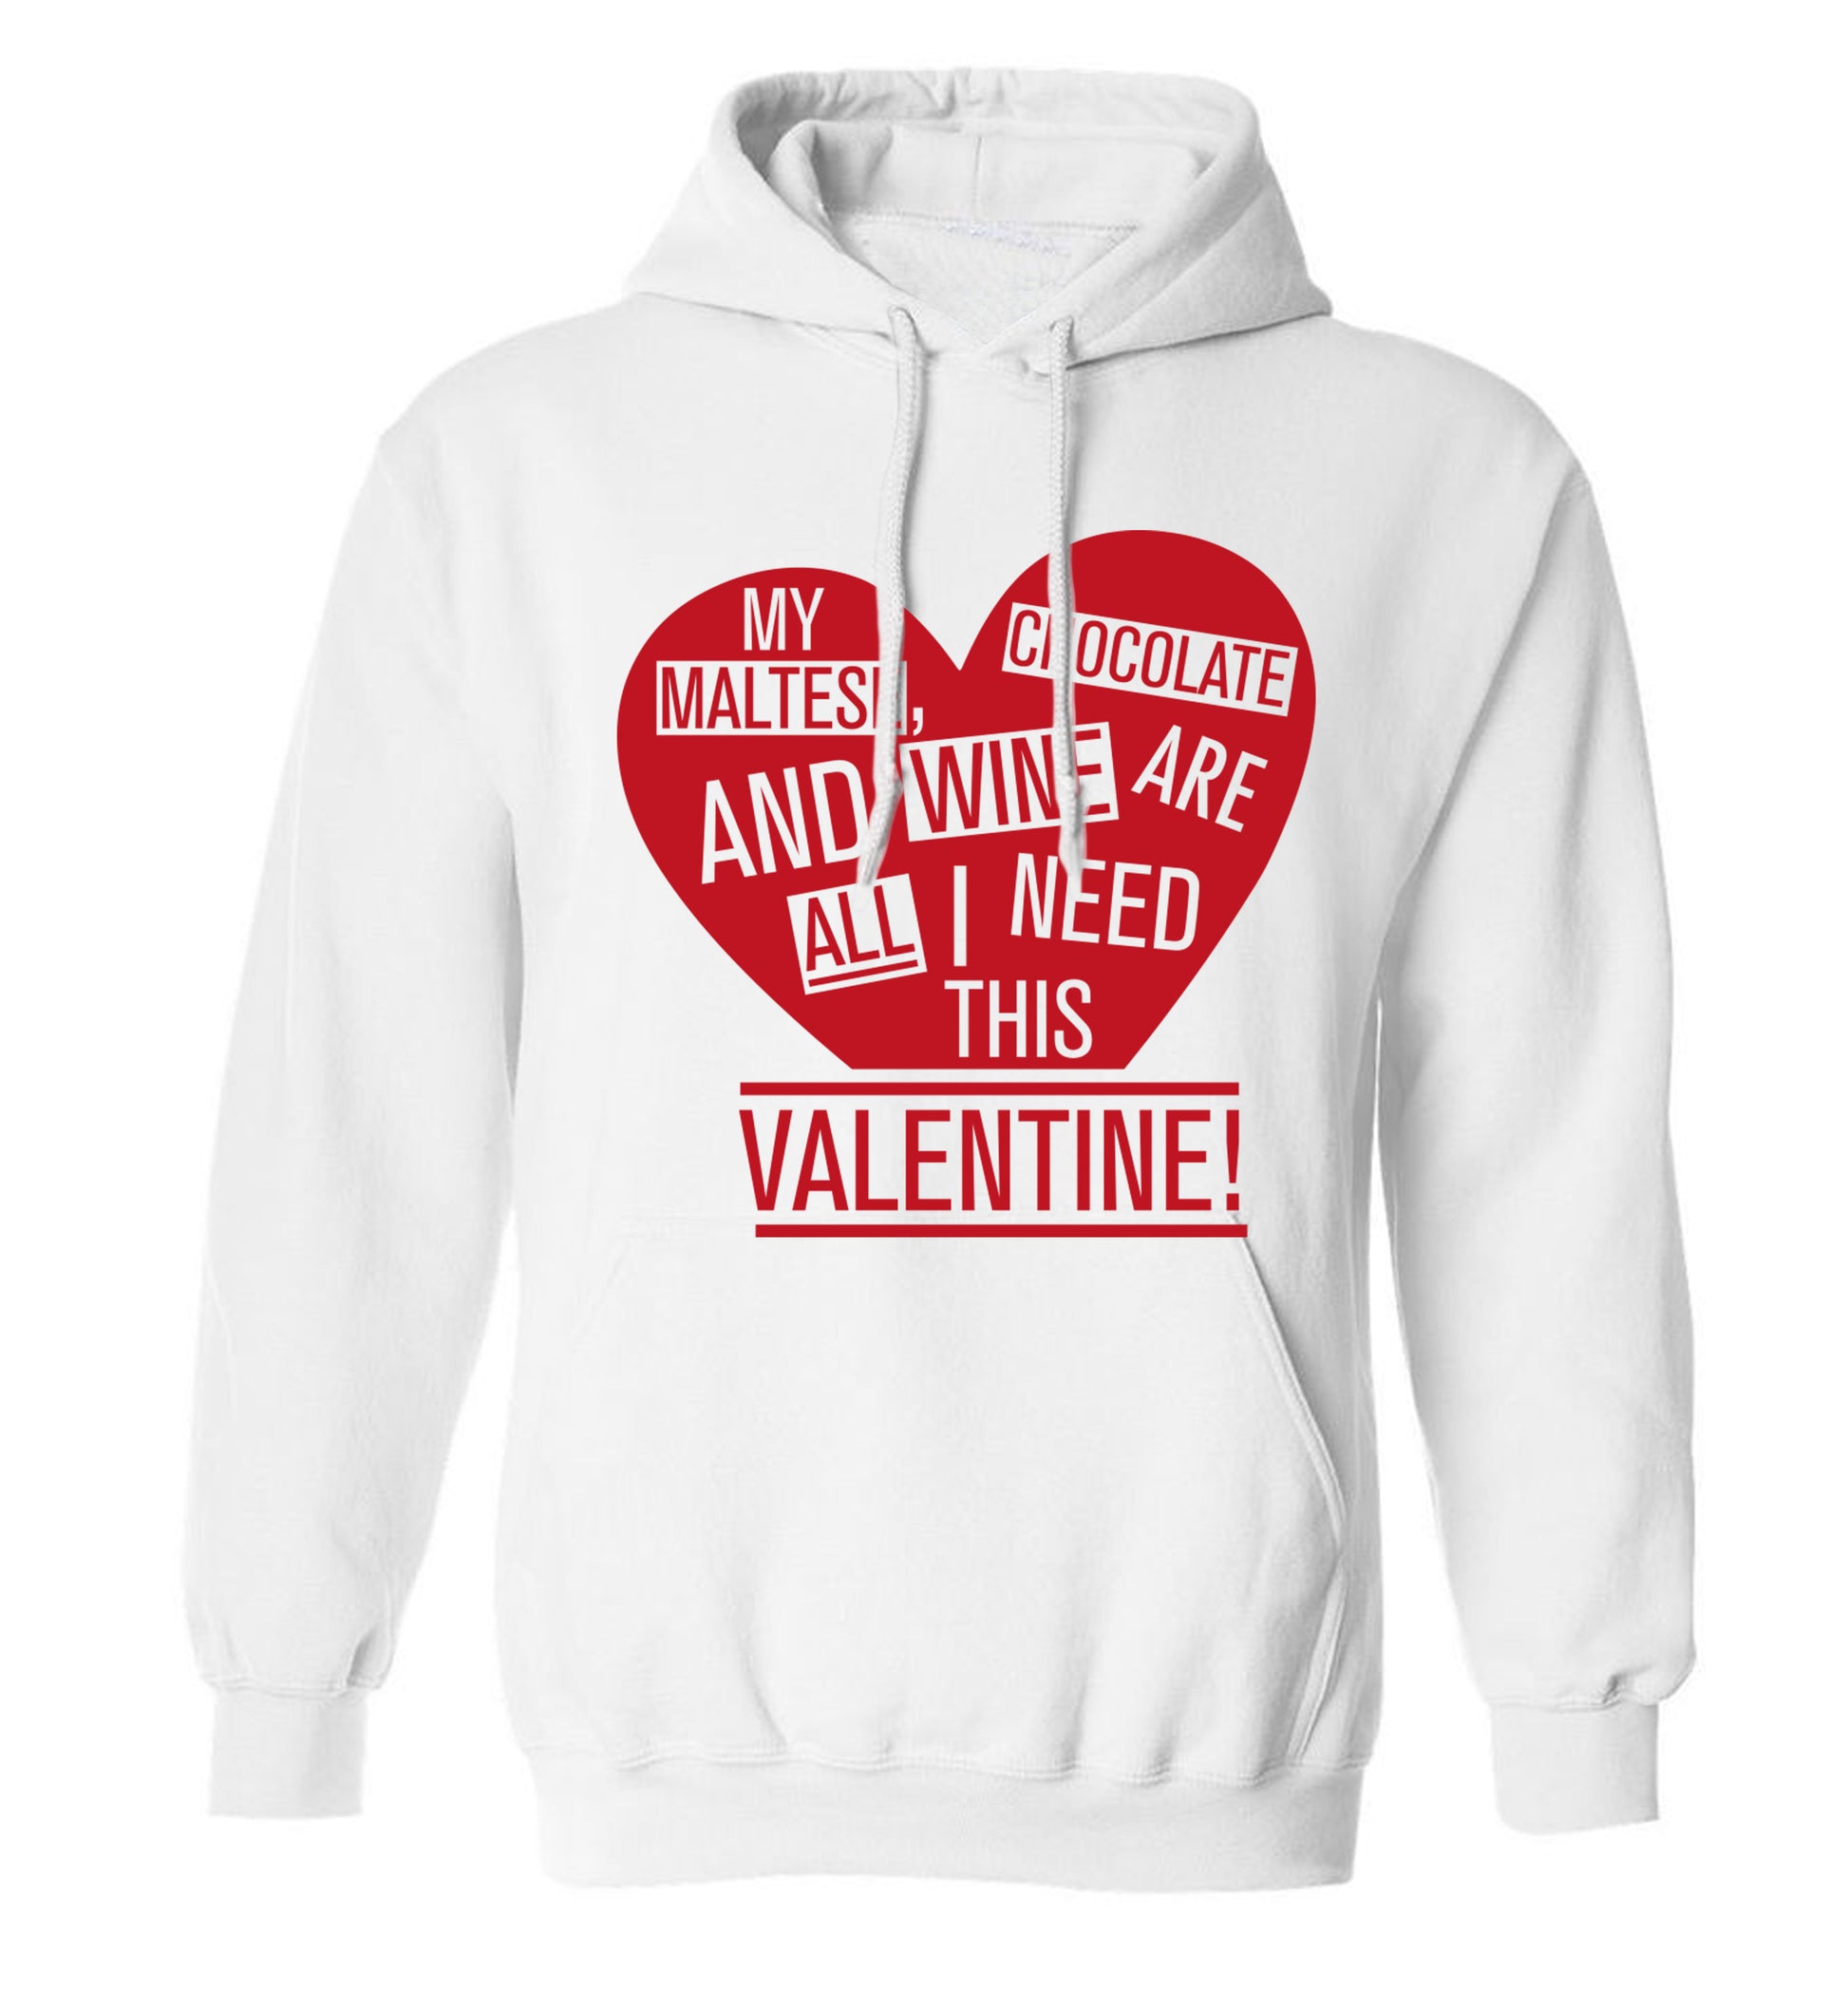 My maltese, chocolate and wine are all I need this valentine! adults unisex white hoodie 2XL